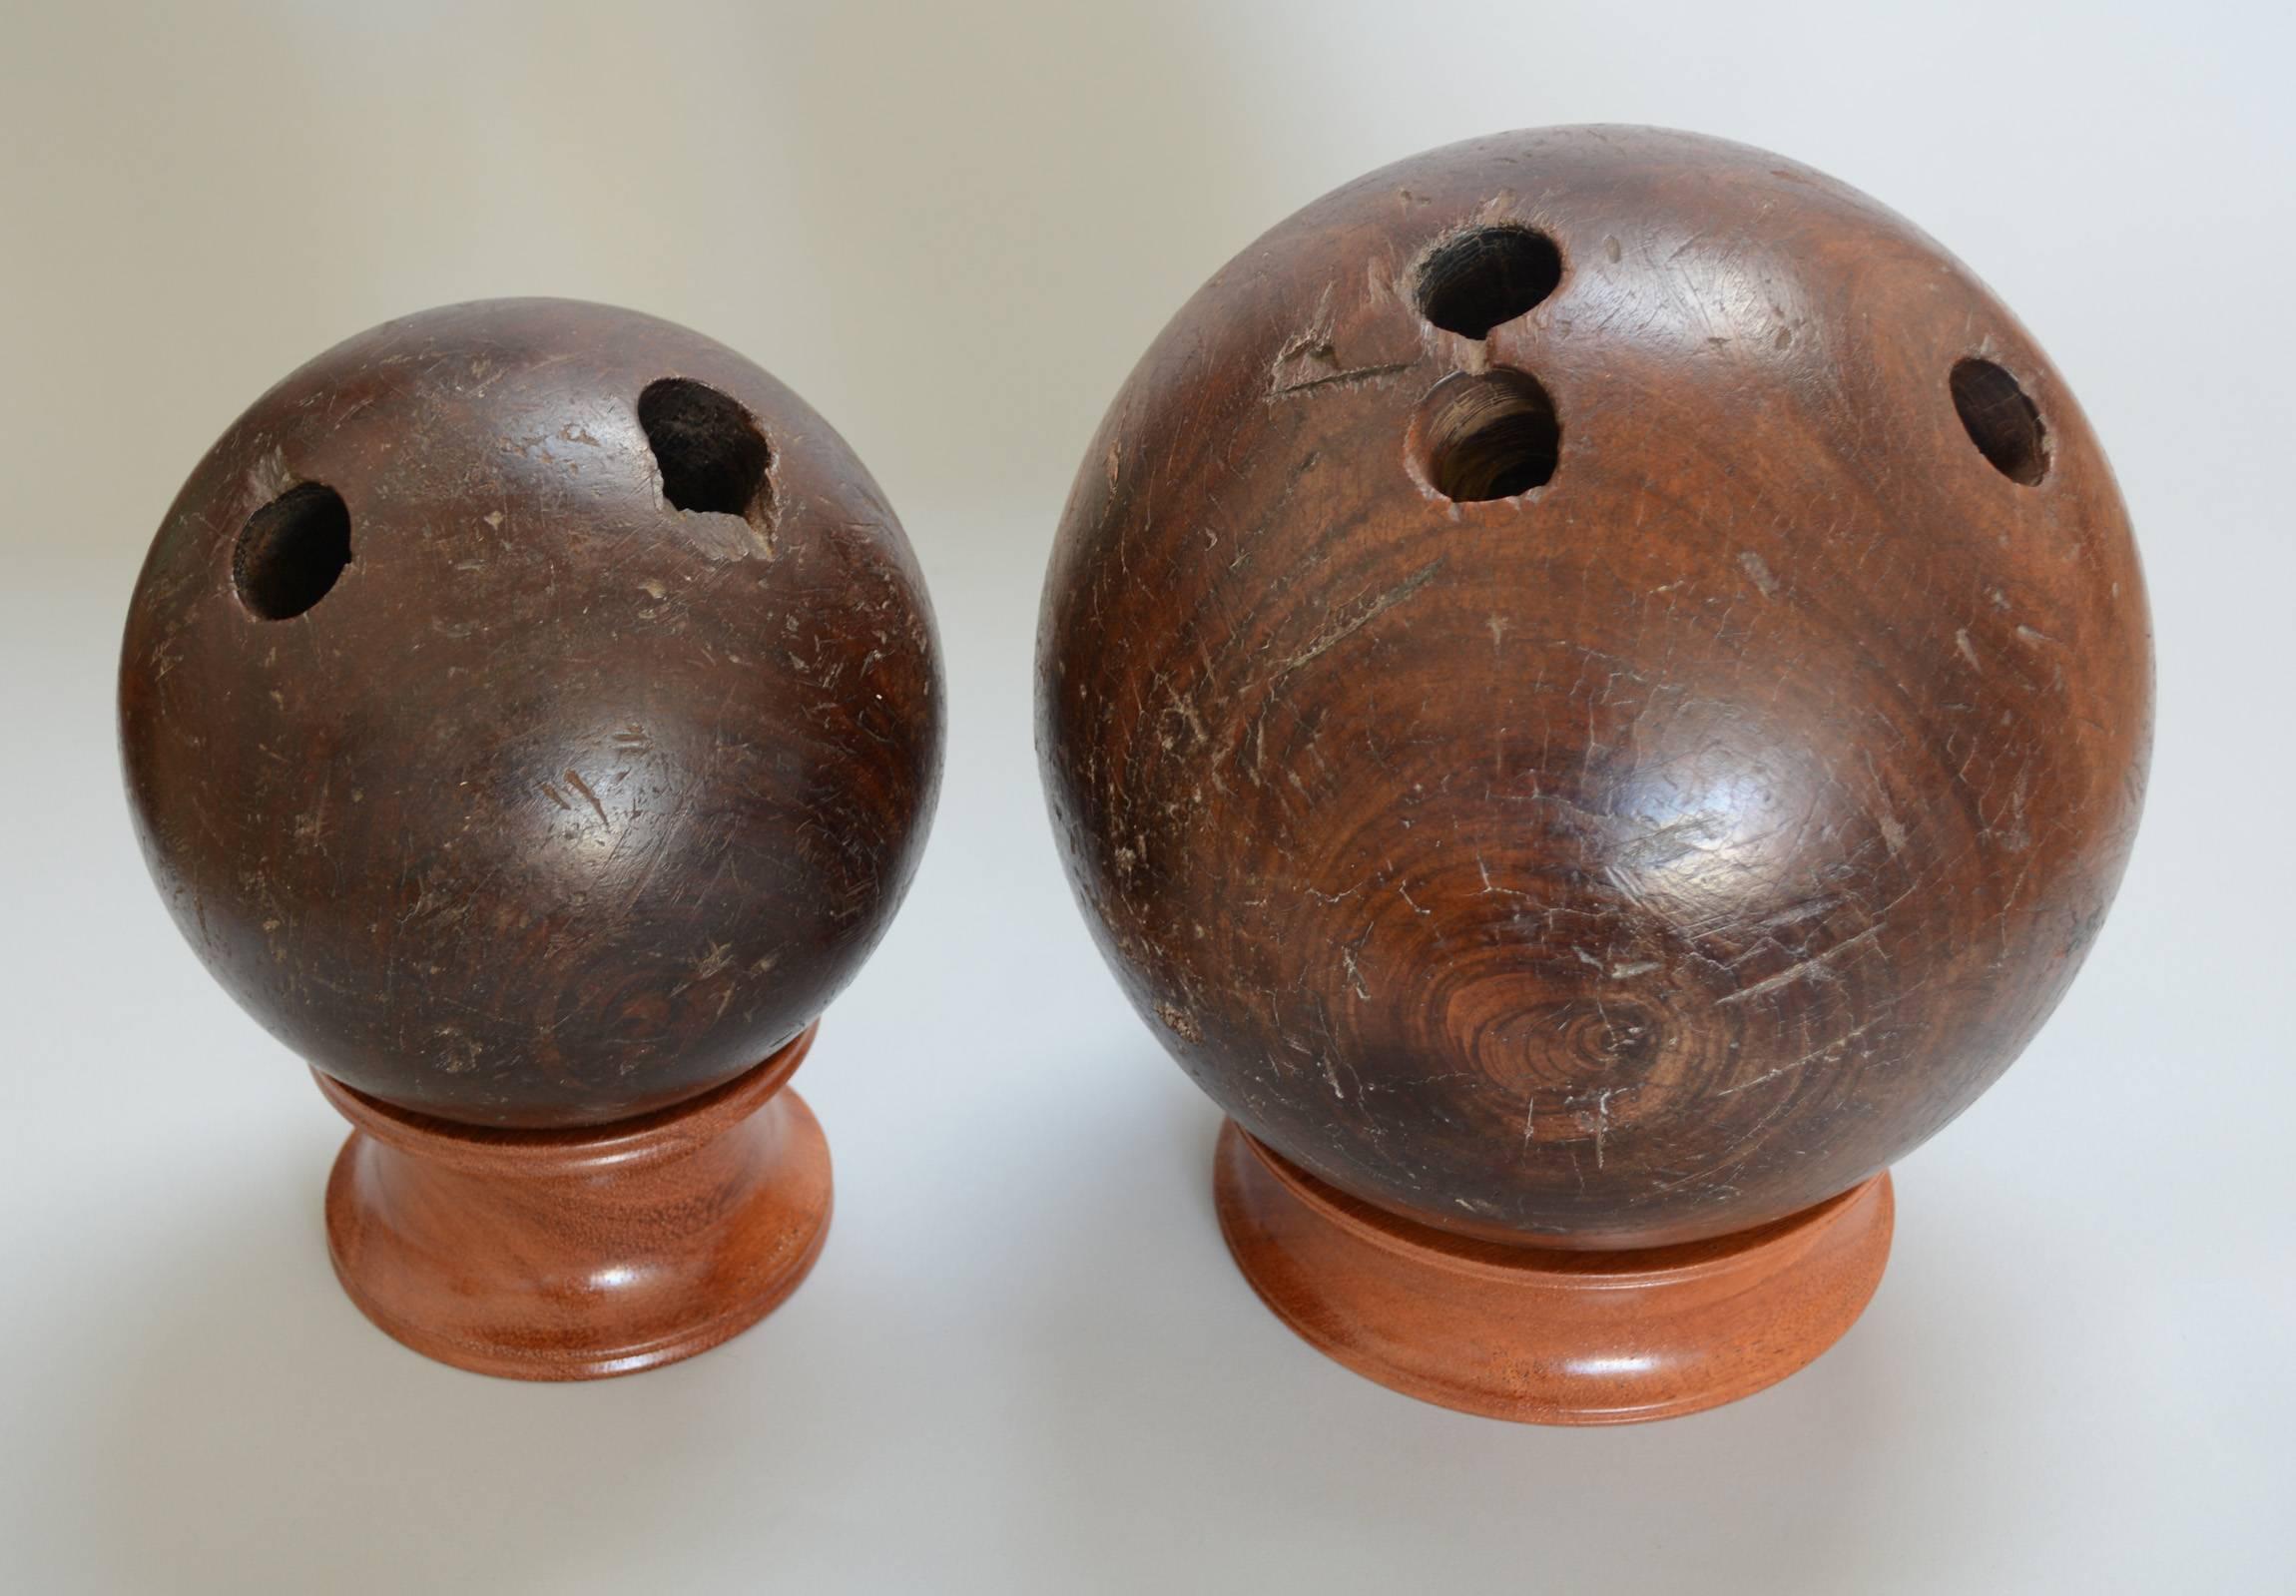 Two early 20th century bowling balls made from lignum vitae. These are on mahogany stands. The smaller ball is 6